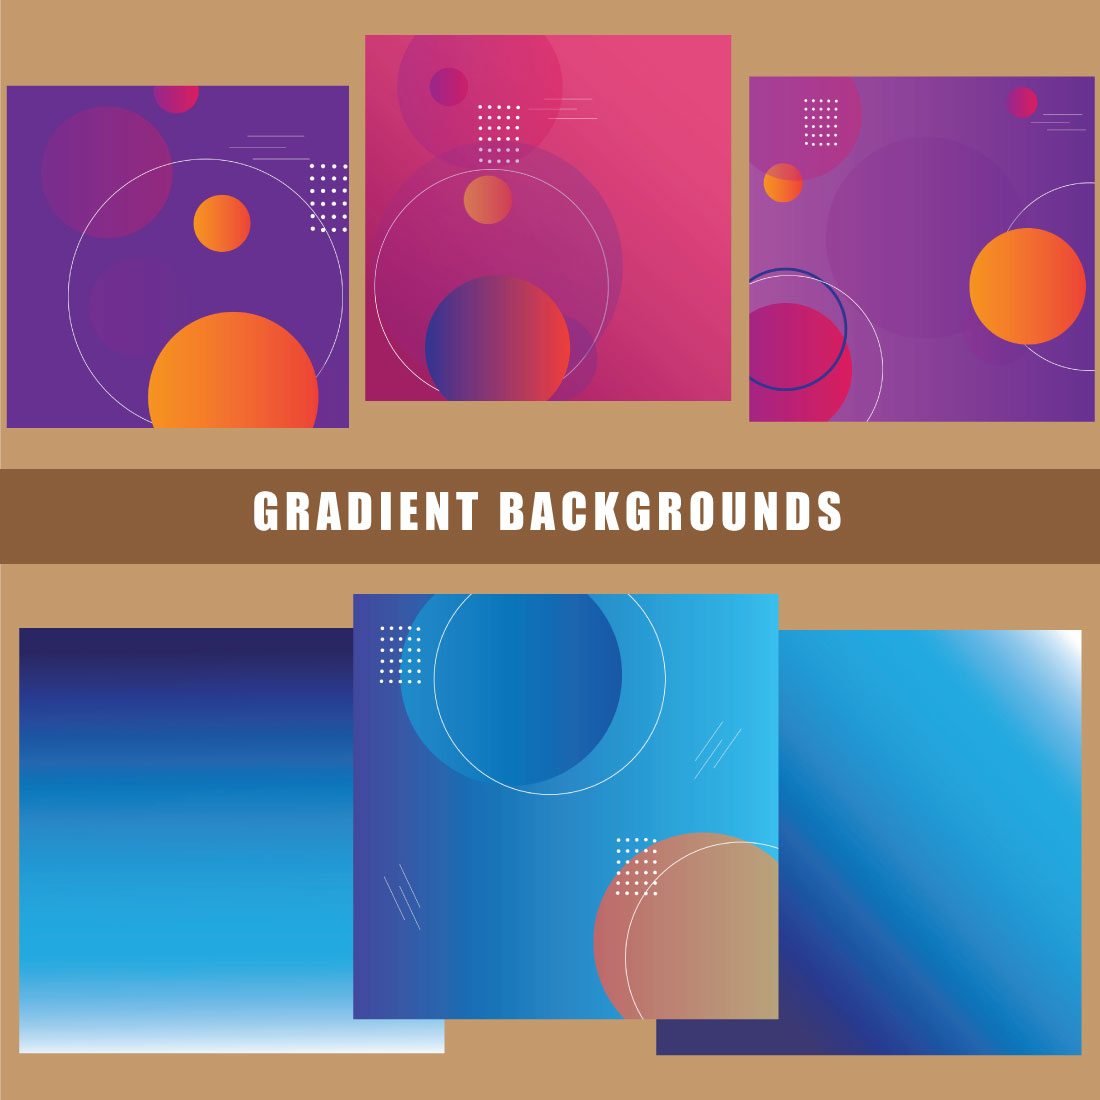 Beautiful Gradient Backgrounds main cover.